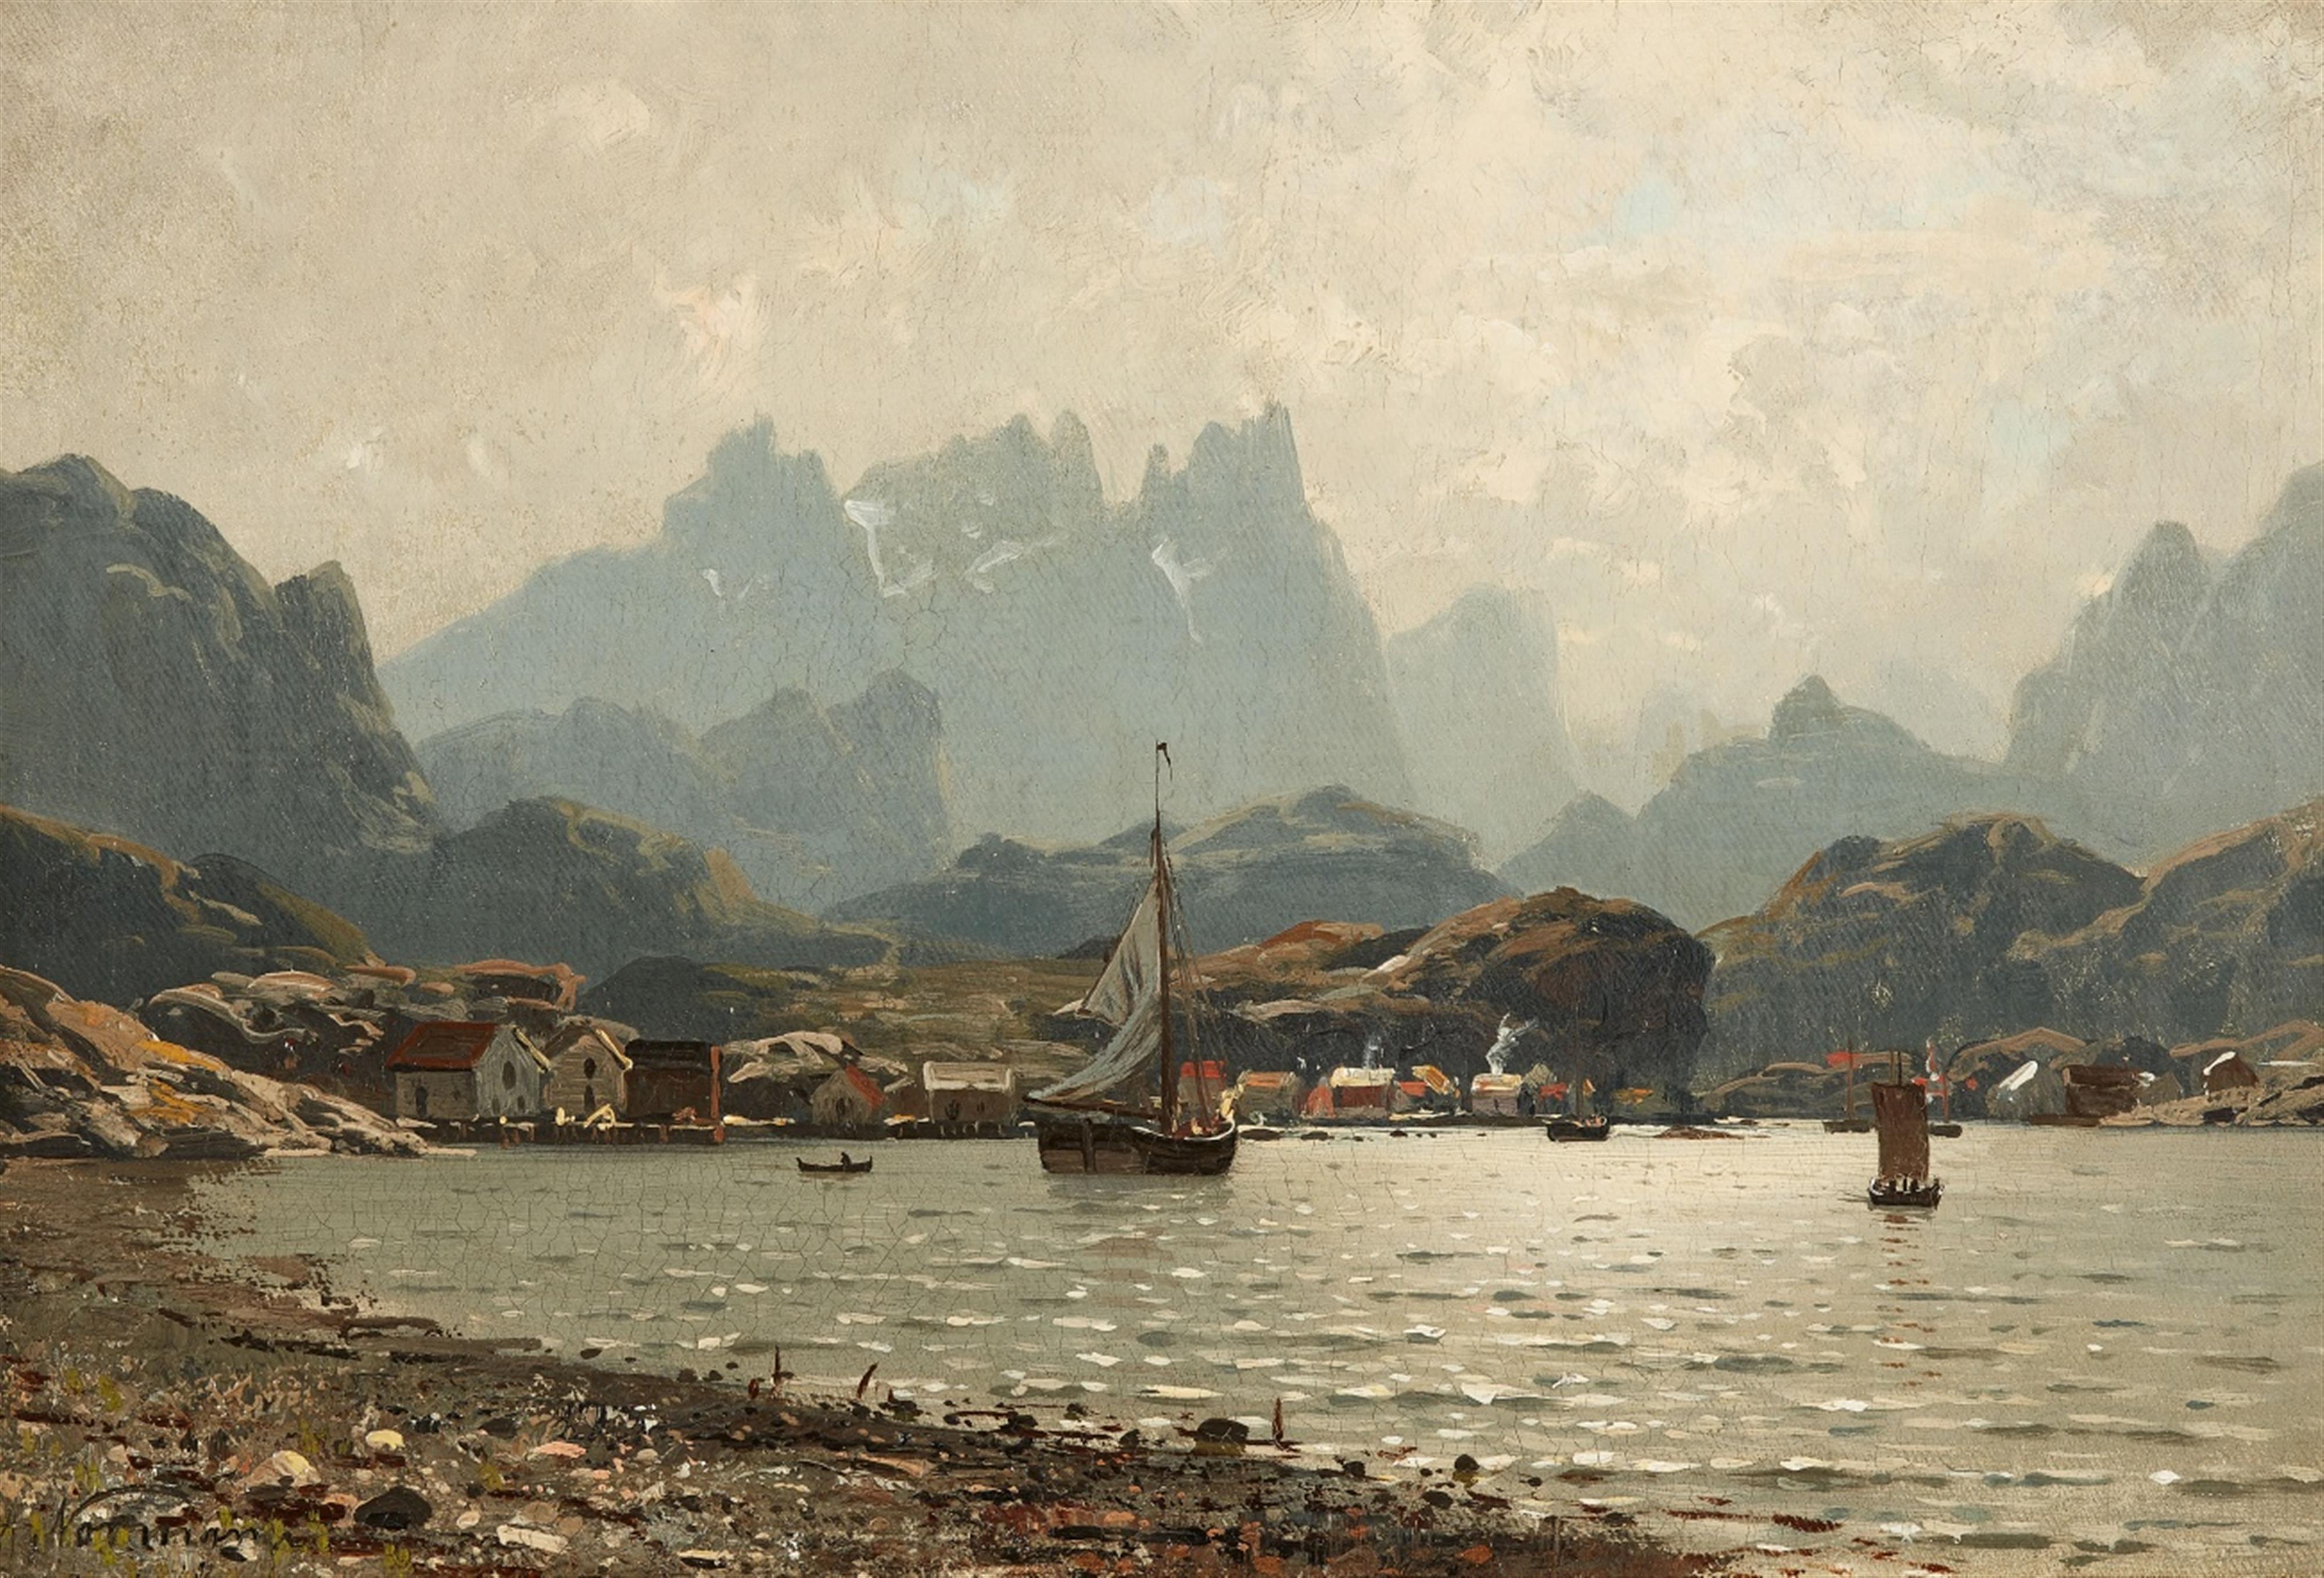 Adelsteen Normann - View of a Village in the Fjords - image-1